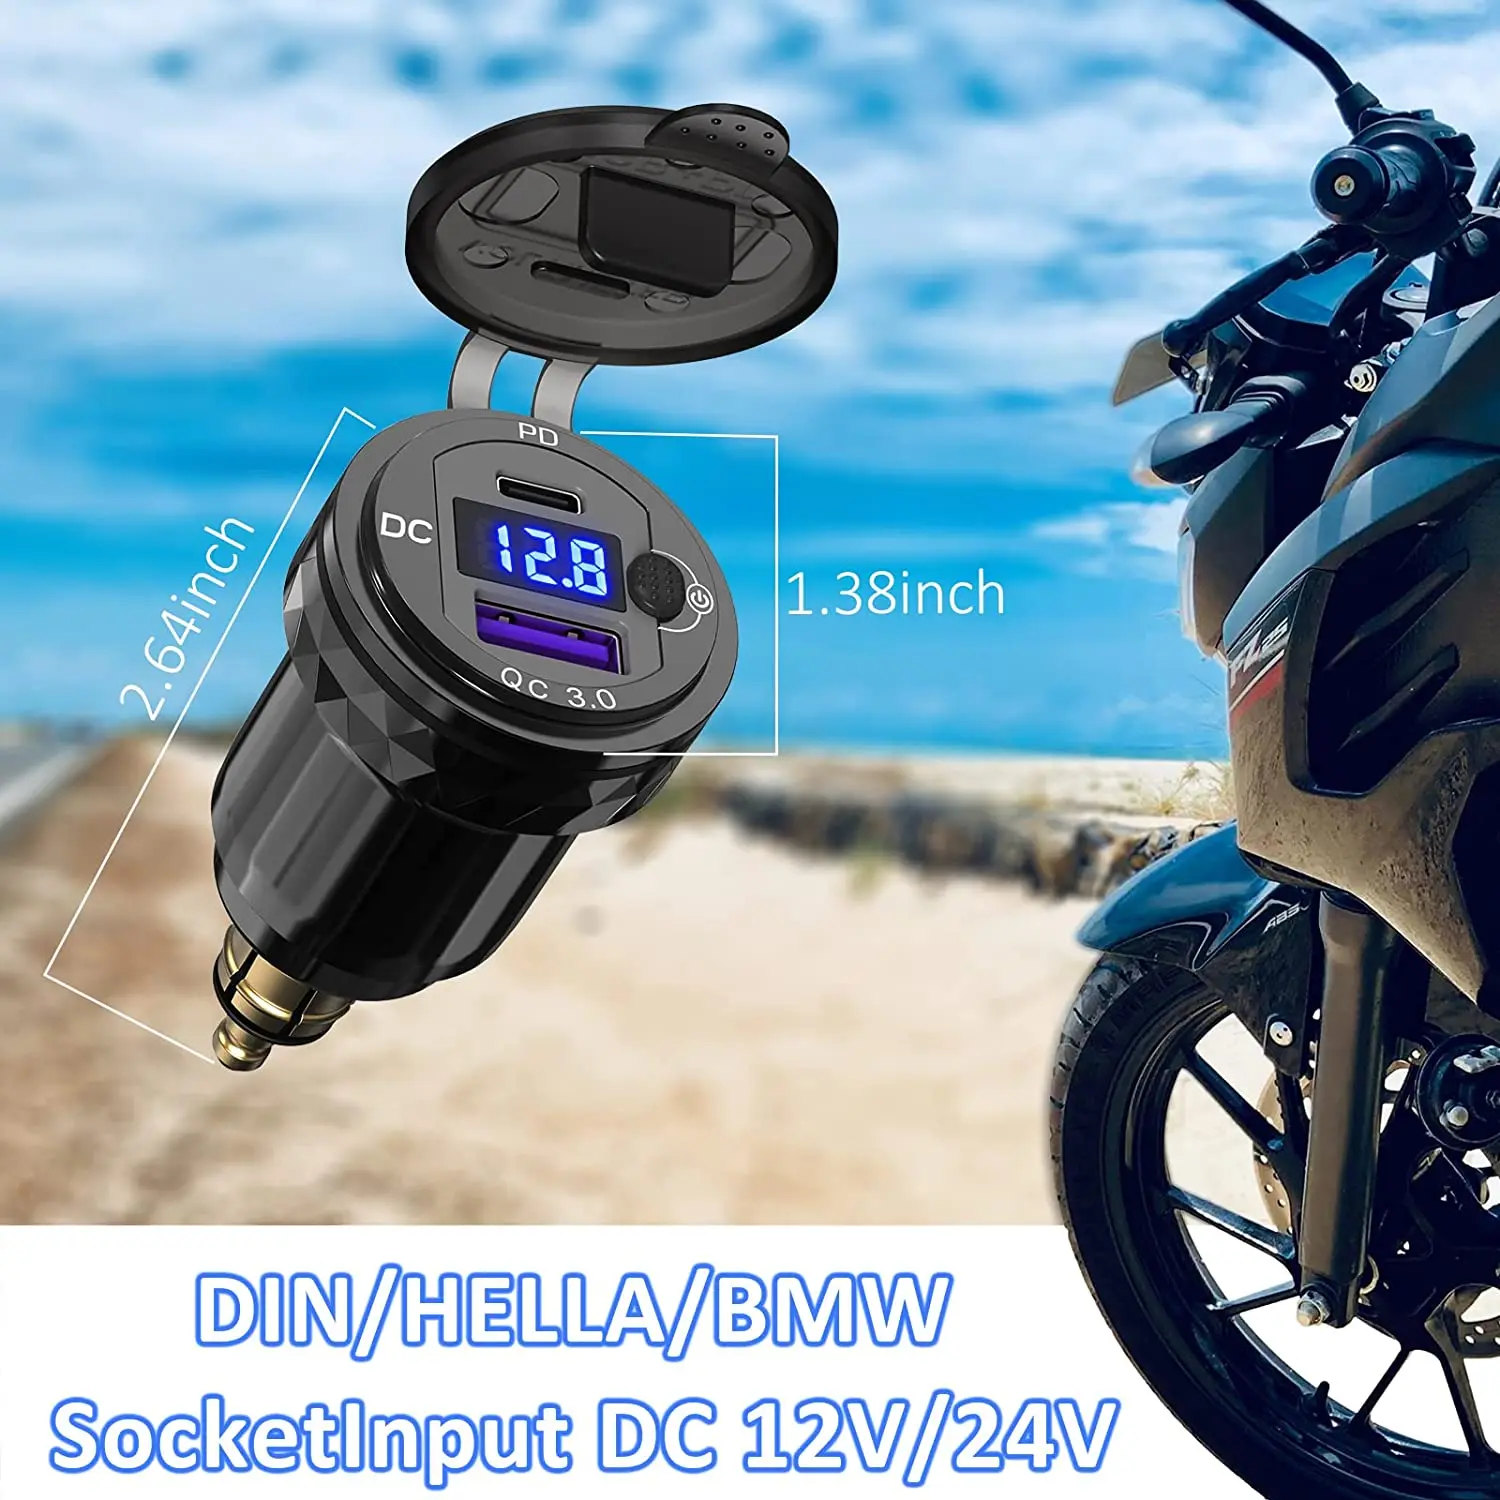  USB C 30W PD3.0 Fast Charger Din to USB, Hella Plug USB  Adapter, 18W QC3.0 Power Outlet, Aluminum Voltmeter for 12V-24V Ducati  Triumph BMW Motorcycle and More European Style Motorcycles 